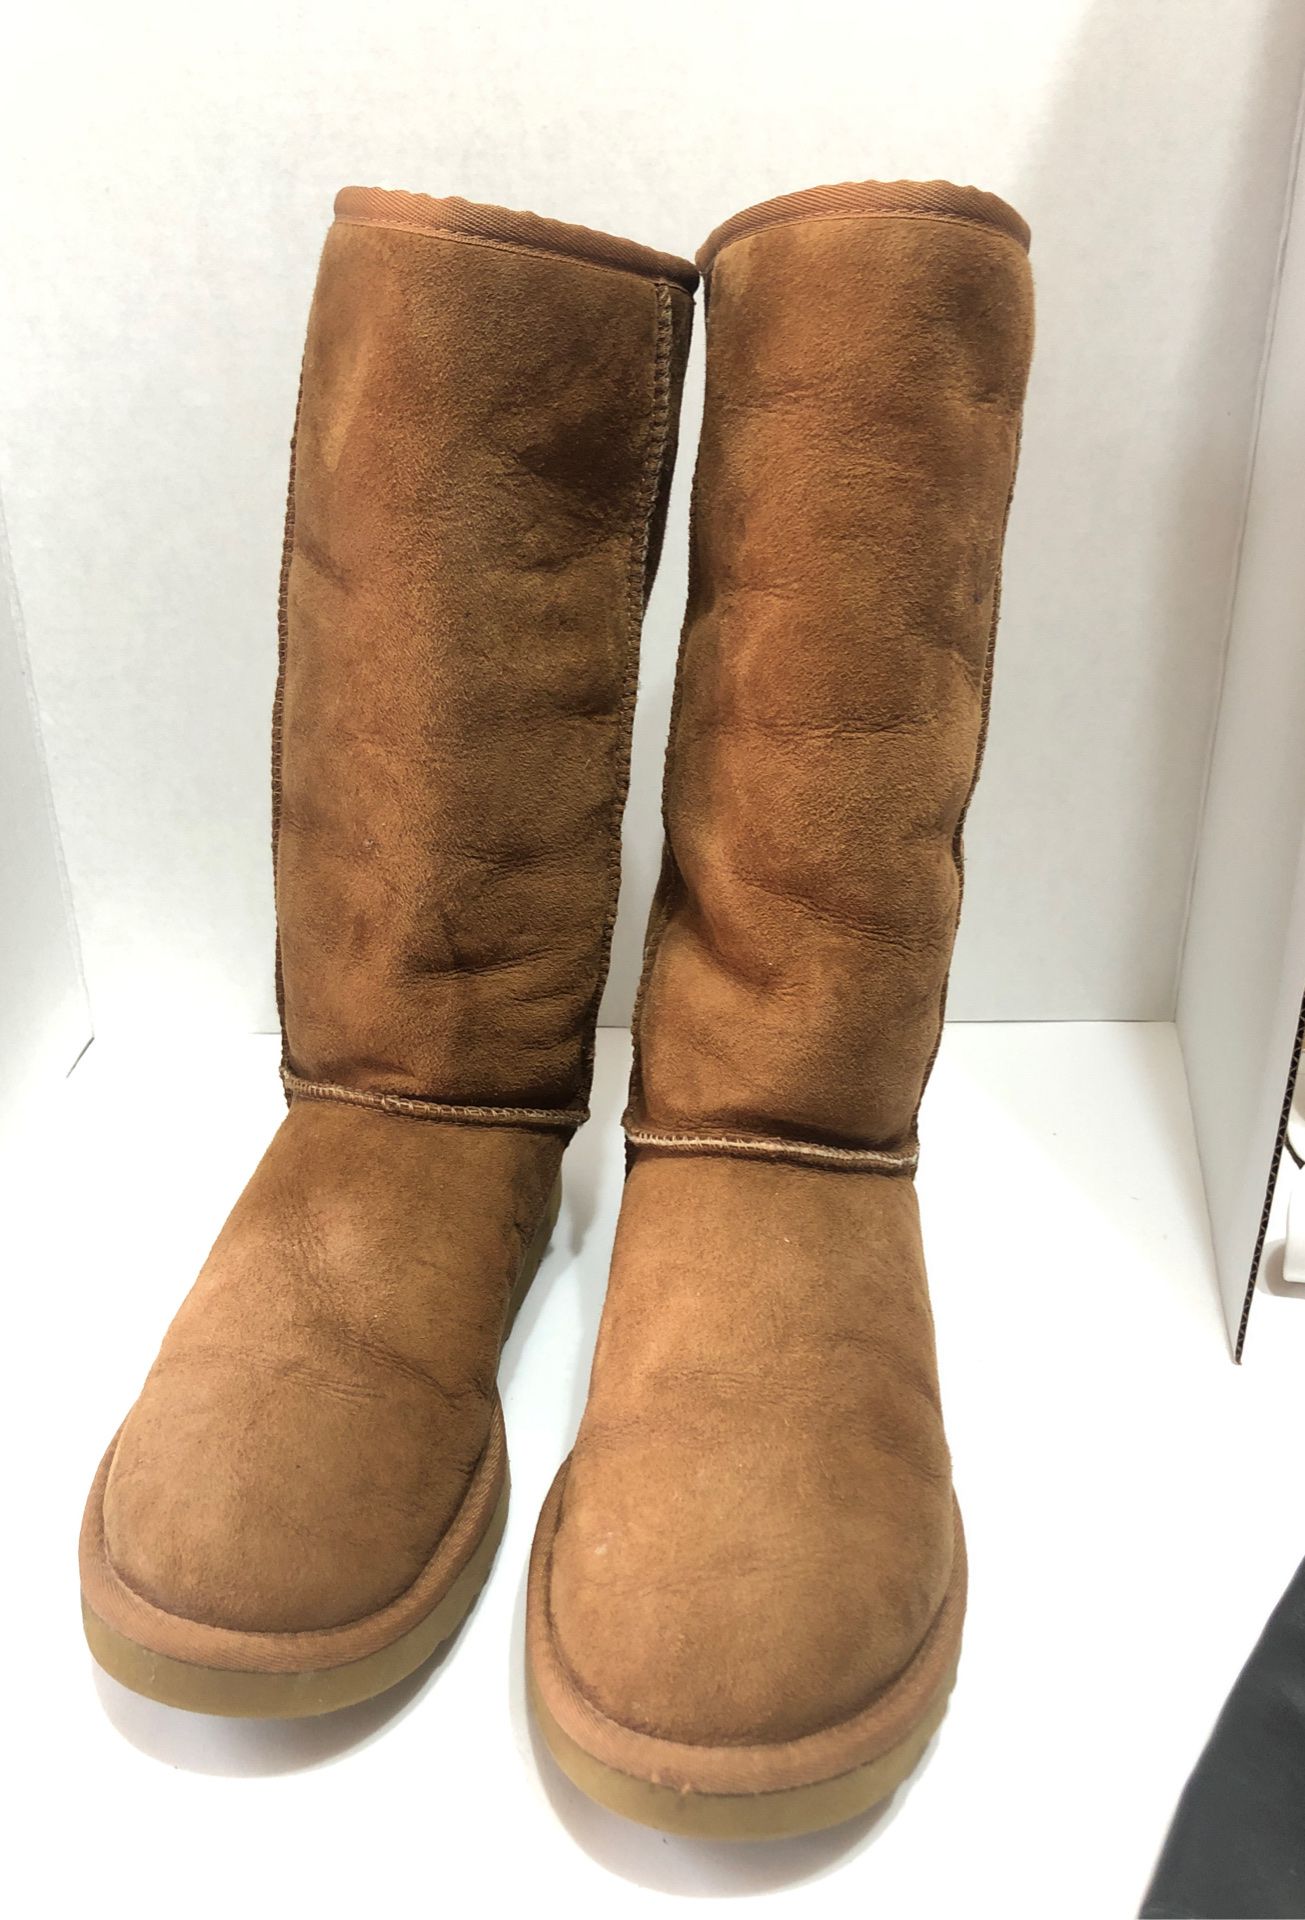 Ugg women boots size 9